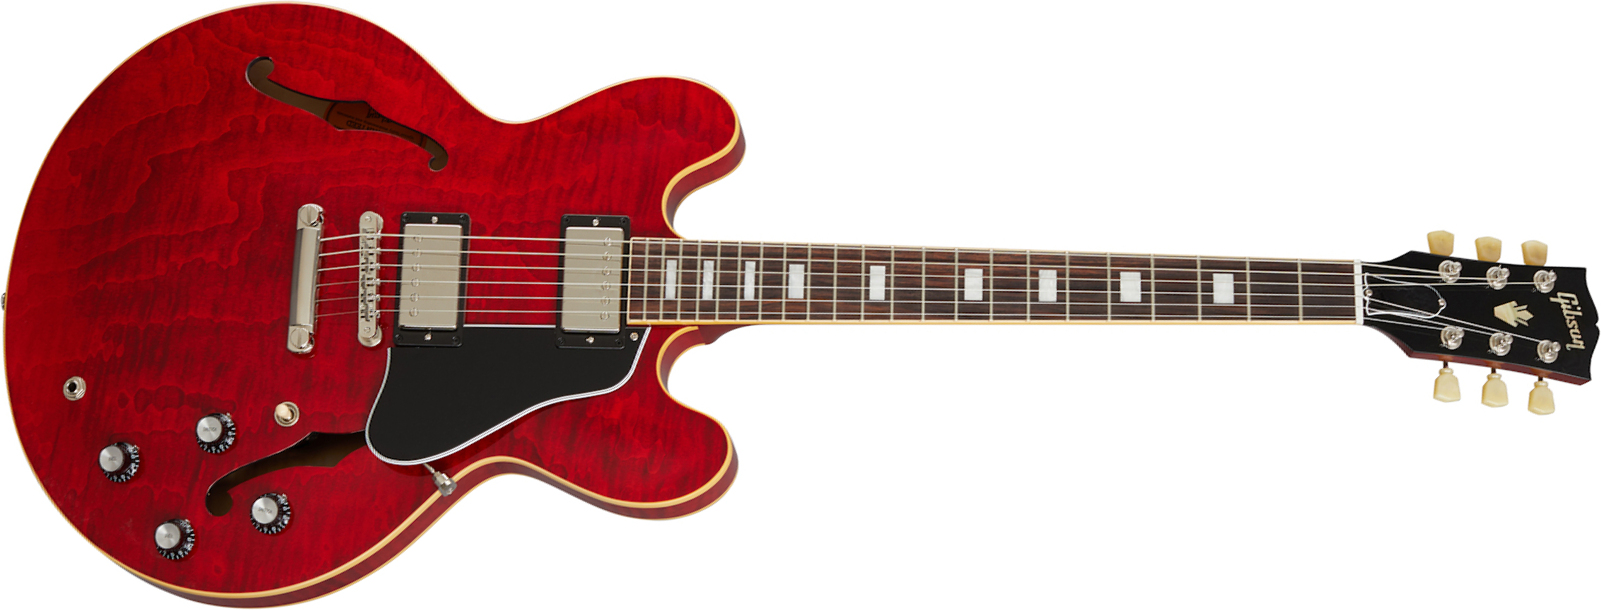 Gibson Es-335 Figured Original 2020 2h Ht Rw - Sixties Cherry - Semi-hollow electric guitar - Main picture